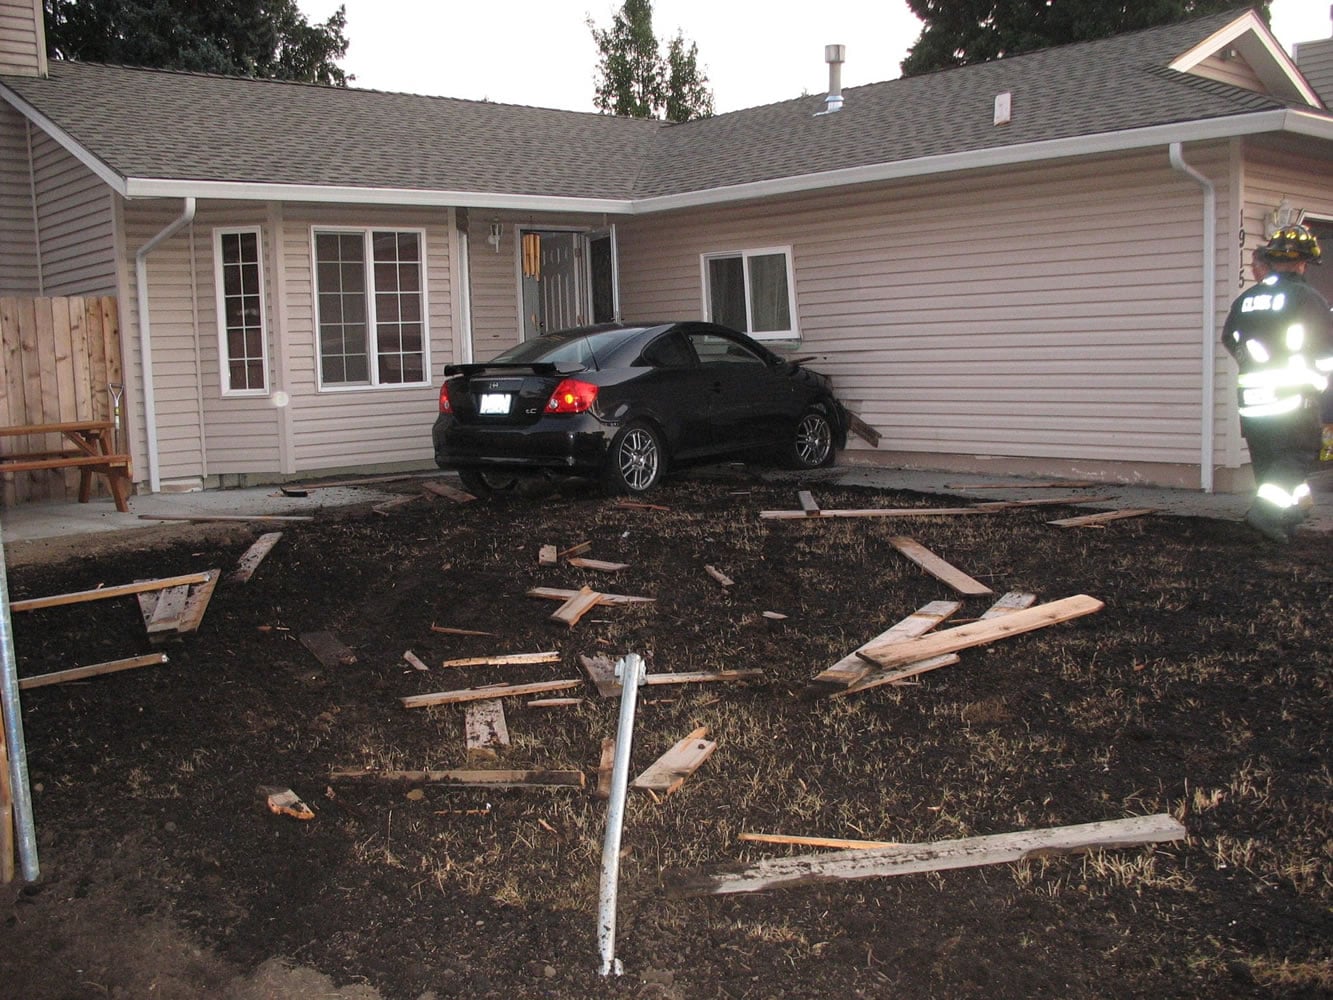 This car, allegedly driven by Rajneel Singh, smacked into a Salmon Creek home on Sunday night injuring a 3-year-old boy.